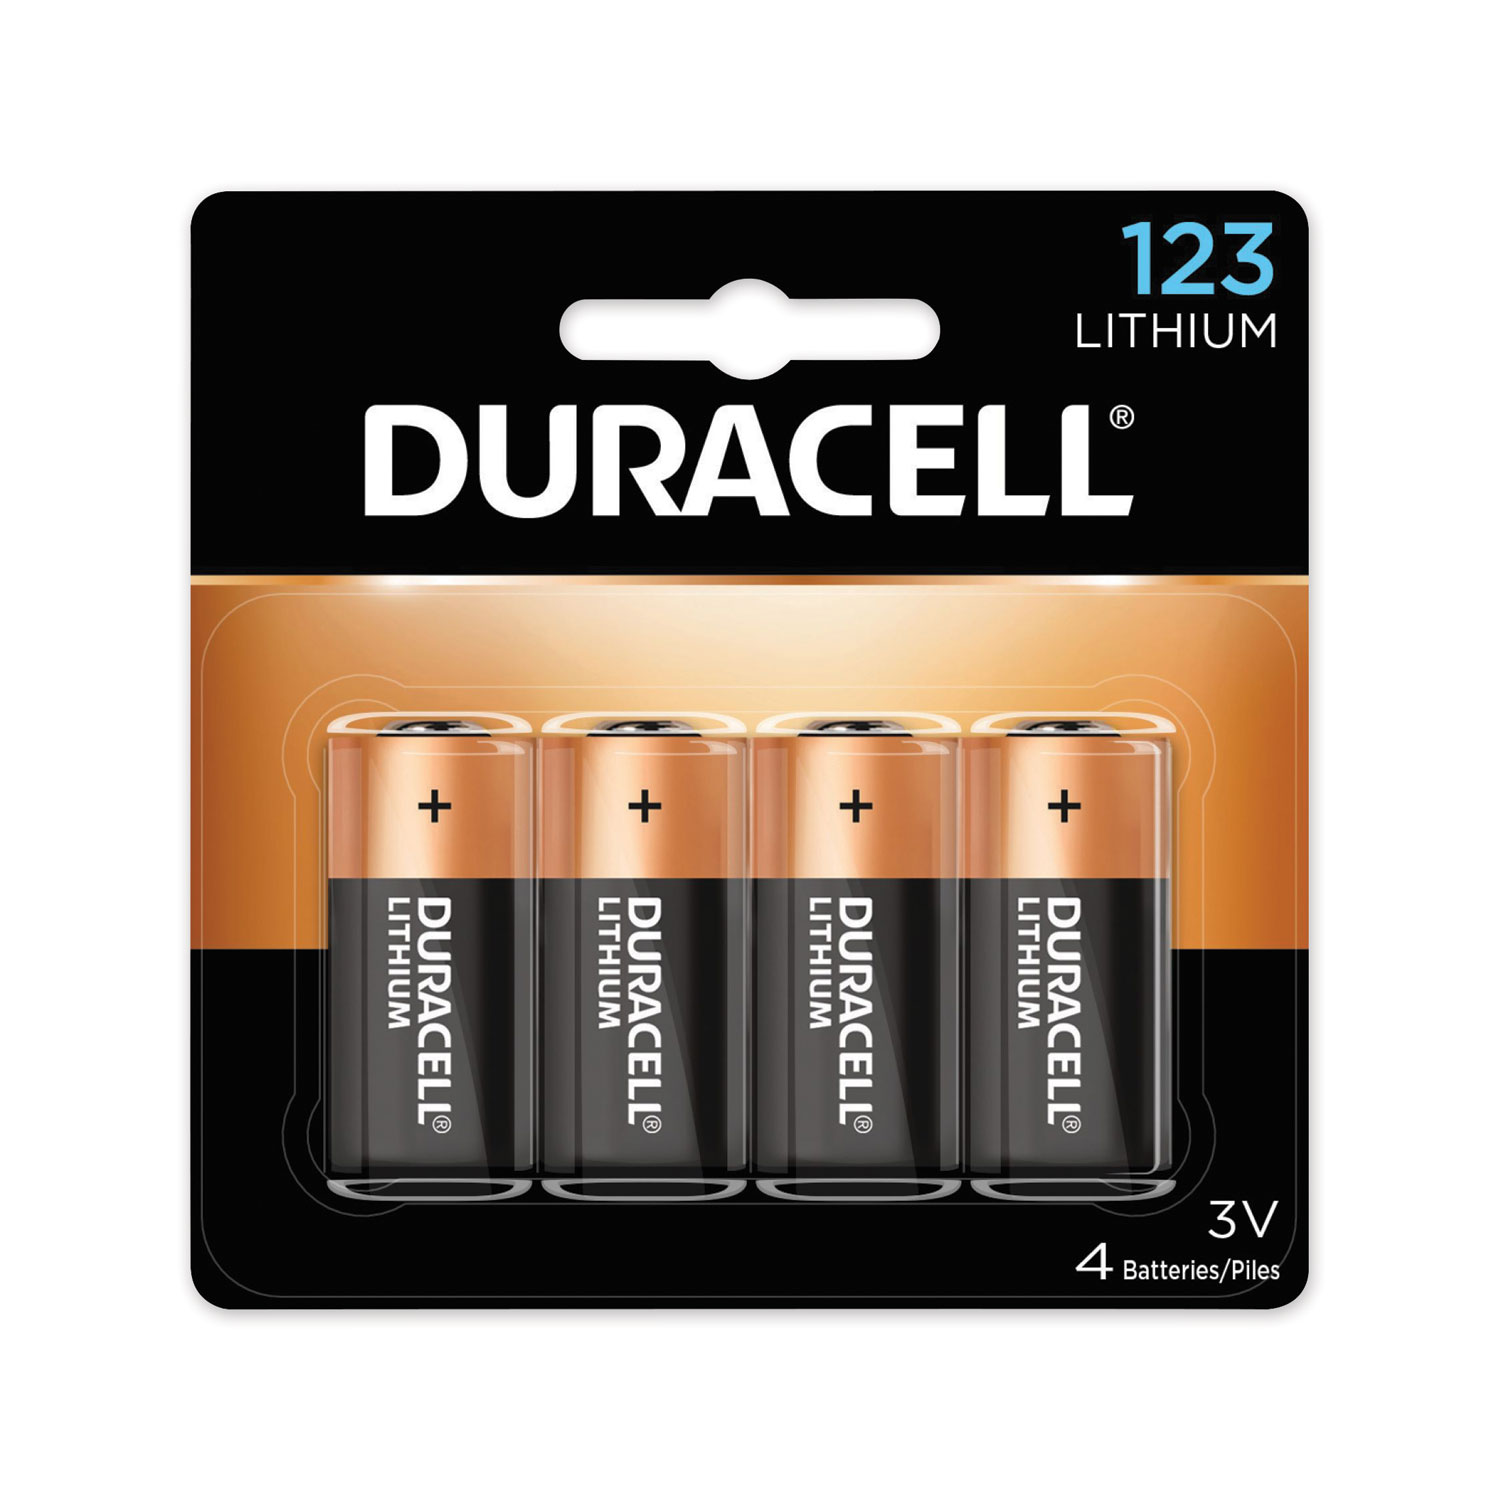  Duracell DL123AB4PK Specialty High-Power Lithium Batteries, 123, 3 V, 4/Pack (DURDL123AB4PK) 